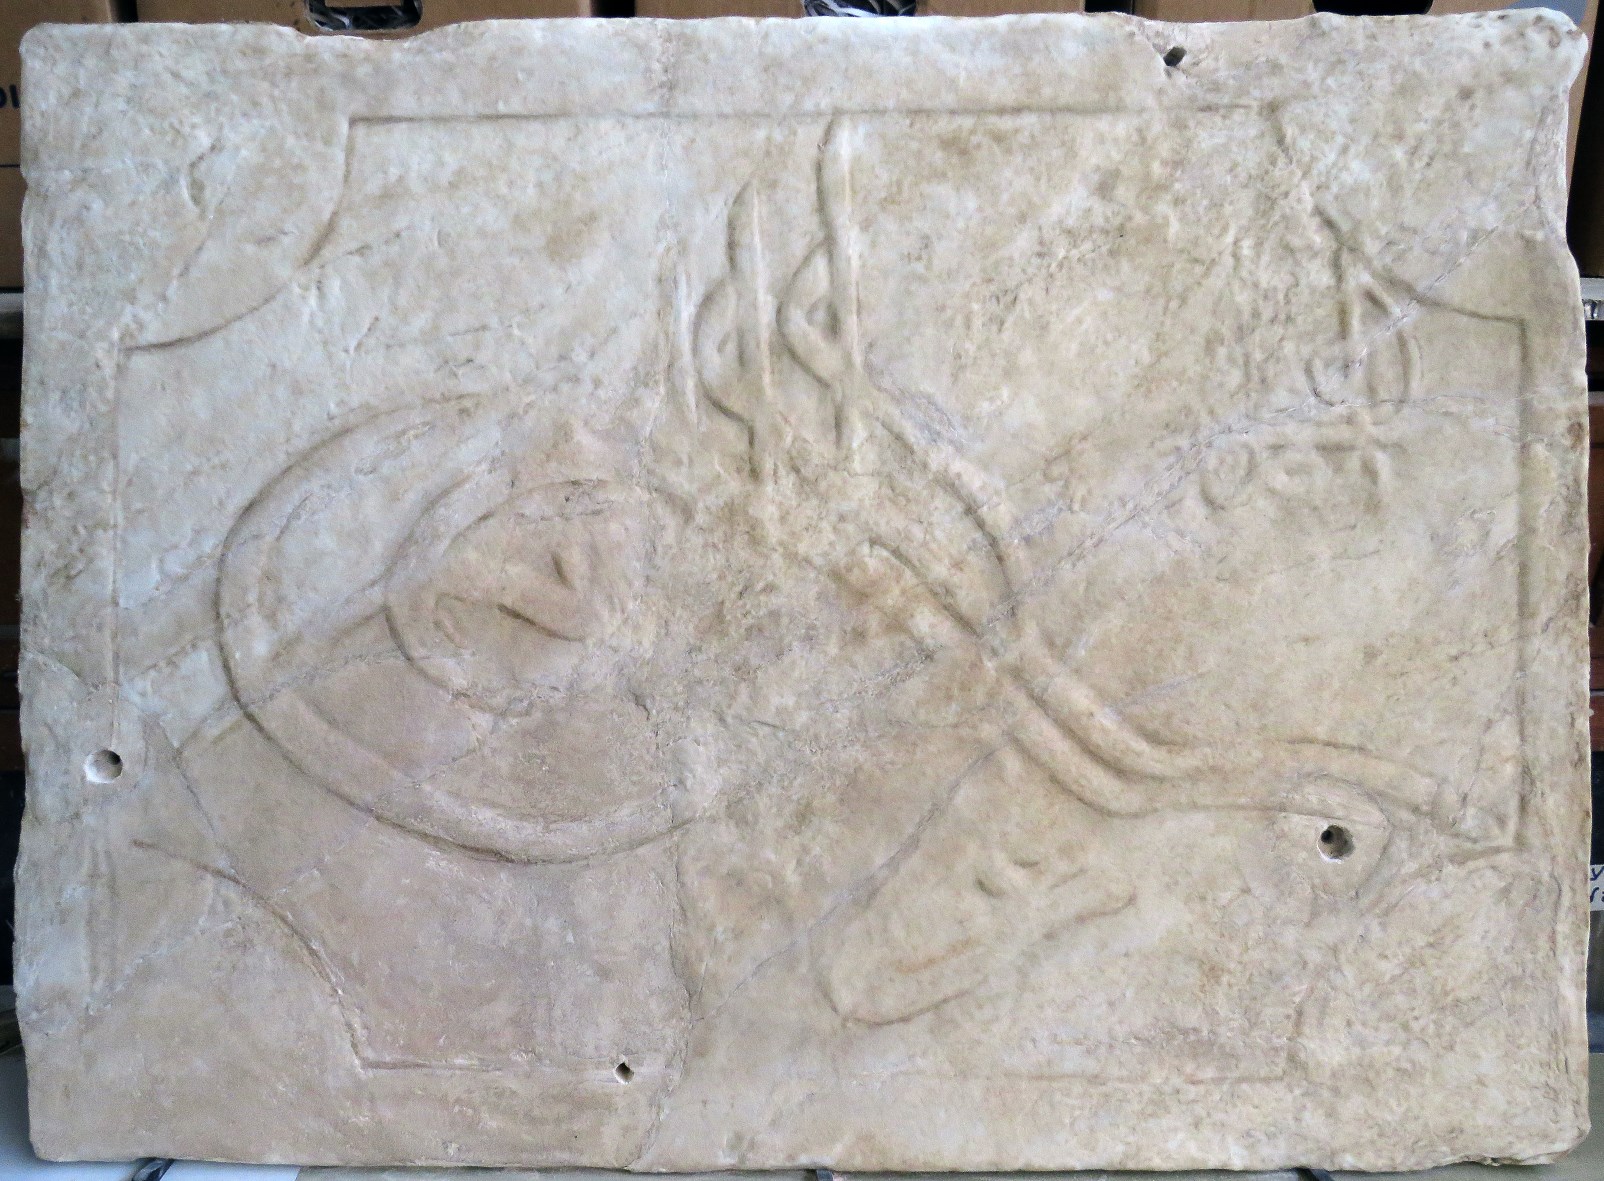 The marble plaque bearing the sultan’s seal. Photo by Faina Milstein, courtesy of the Israel Antiquities Authority